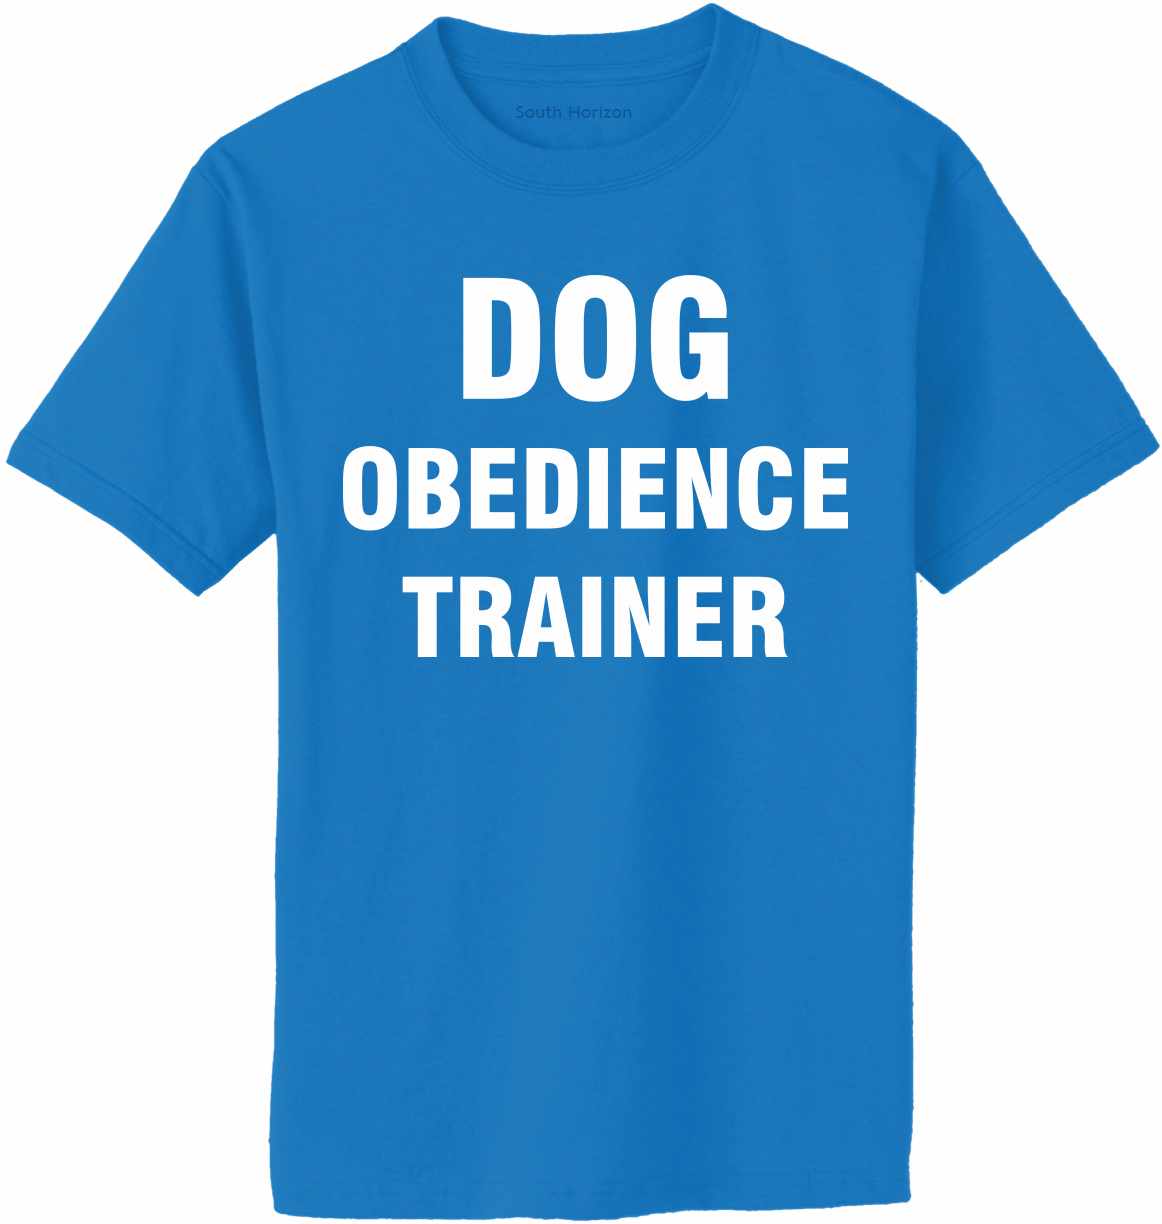 DOG OBEDIENCE TRAINER Adult T-Shirt